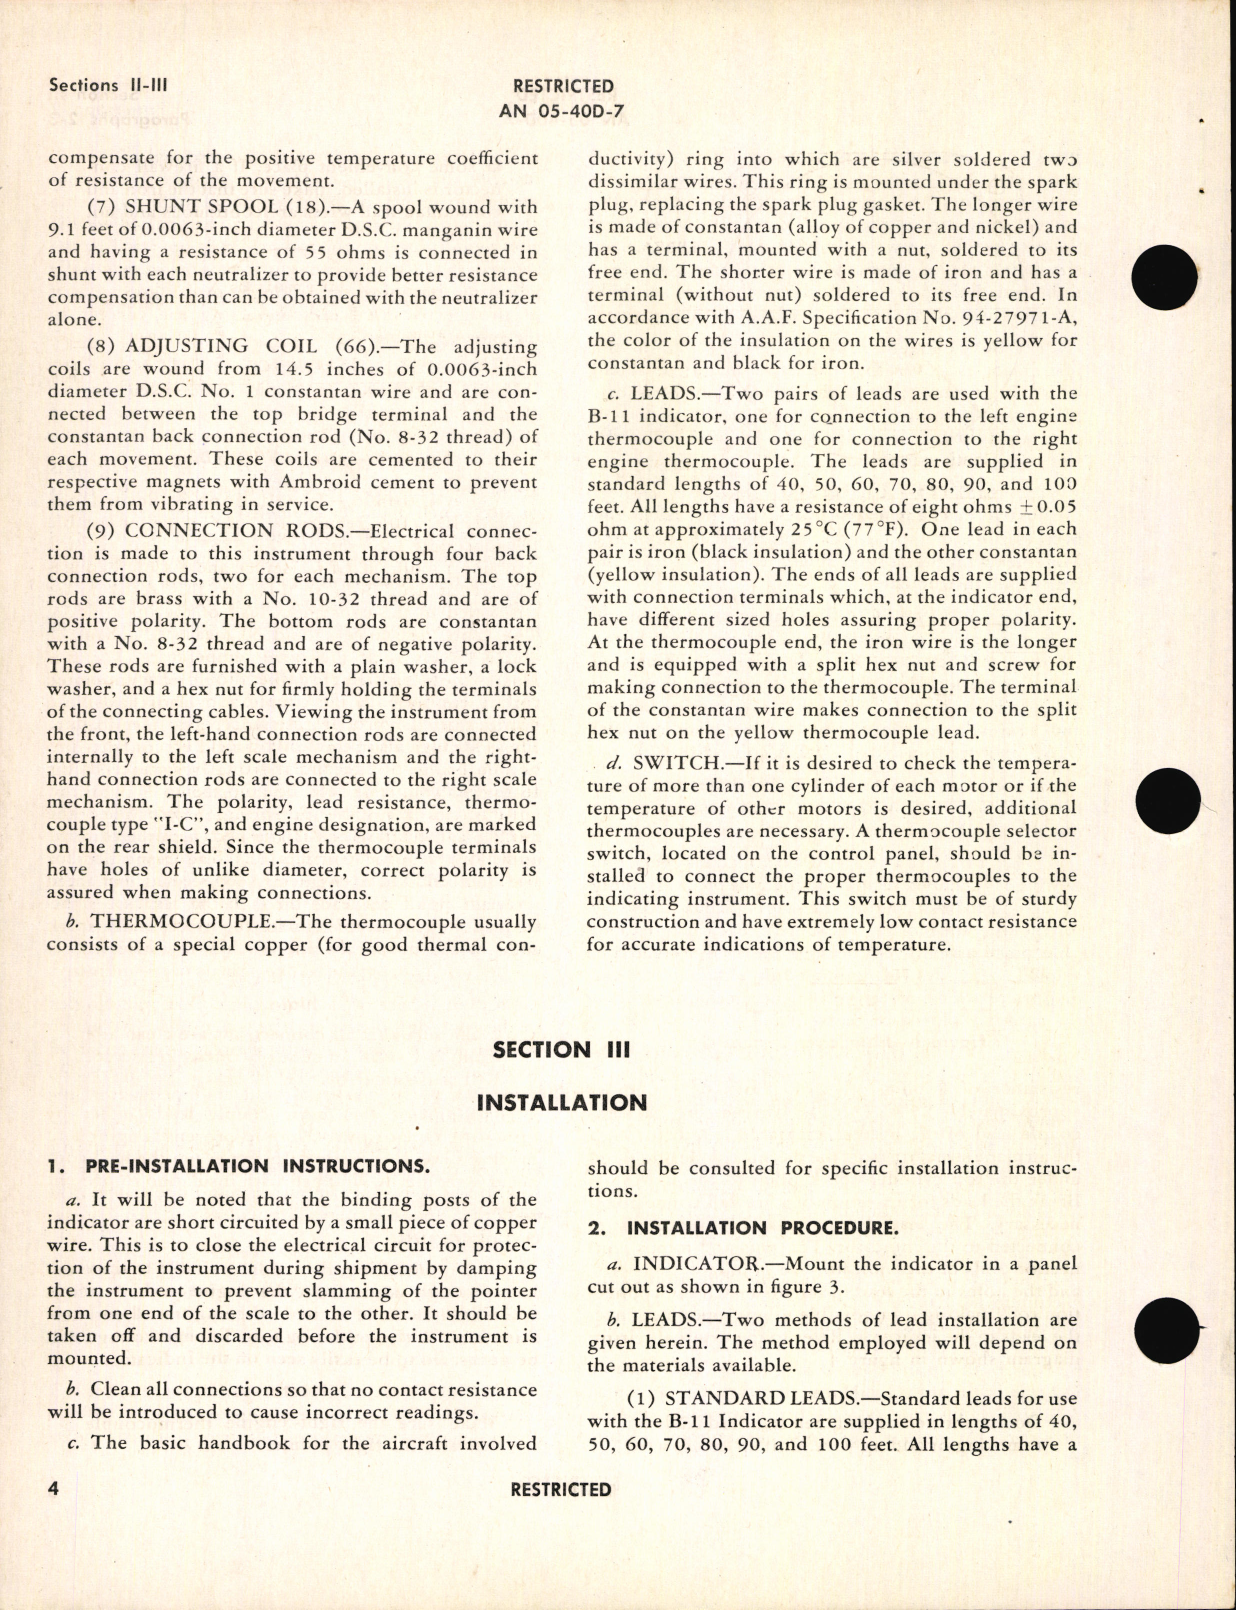 Sample page 8 from AirCorps Library document: Handbook of Instructions with Parts Catalog for Type B-11 and F.S.S.C. 88-I-2662 Thermocouple Thermometer